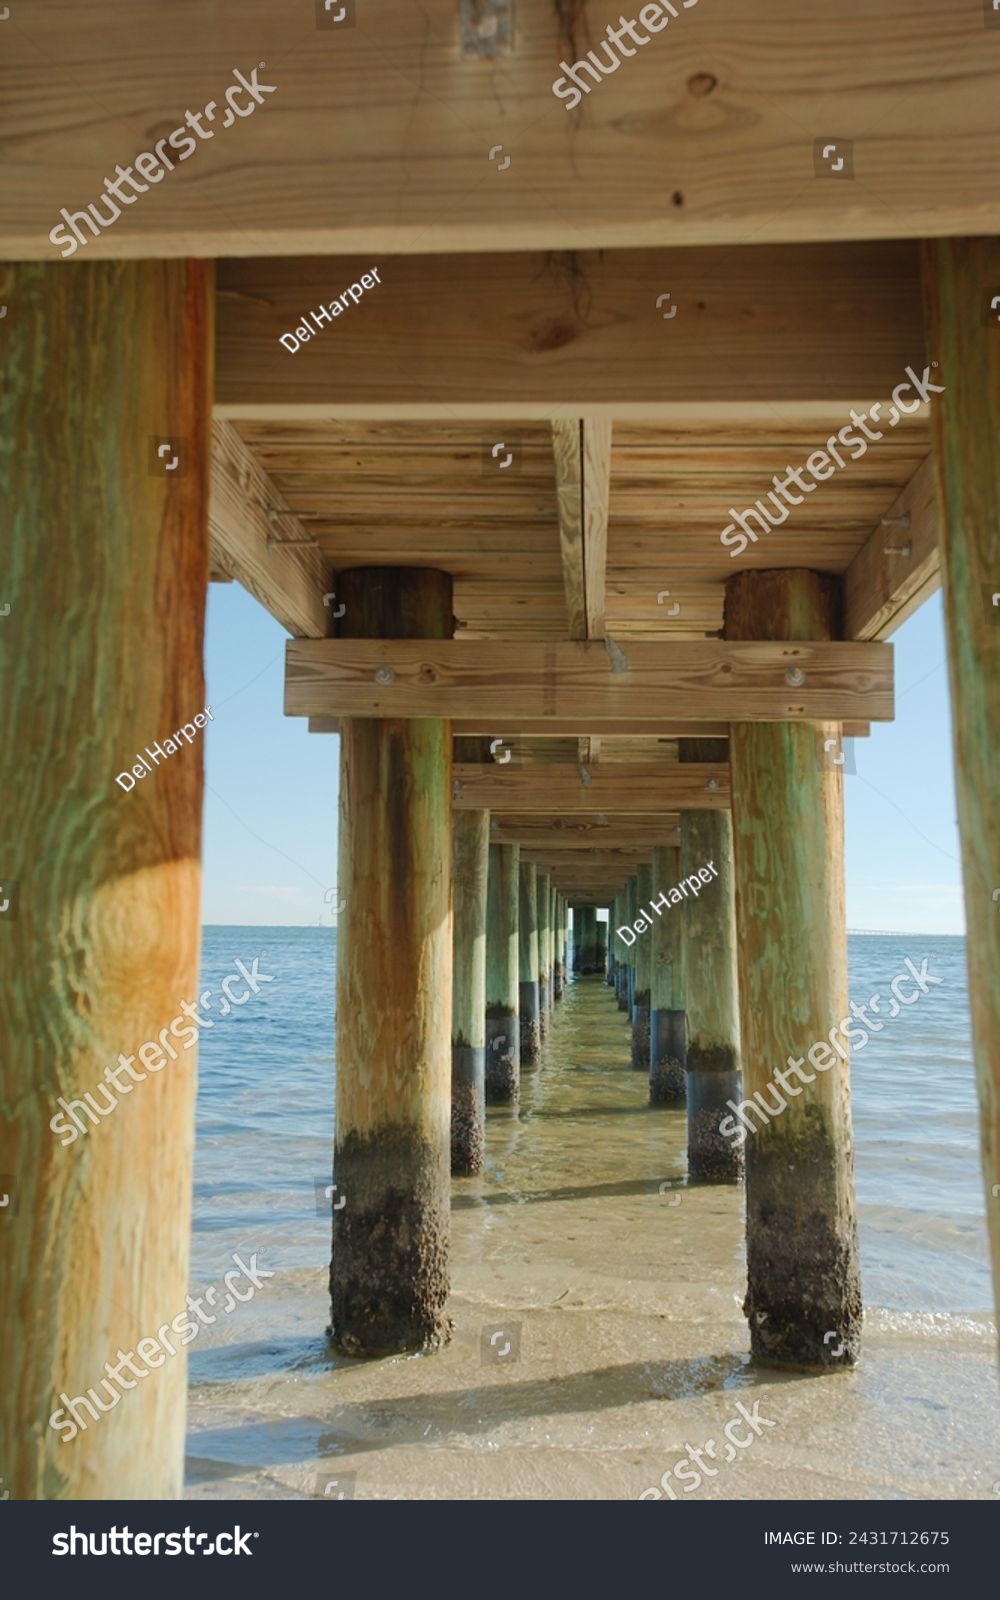 Vertical view under wood pier at Bay Vista Park in St. Petersburg, FL,  Sand, wood poles with high tide water marks leading out to Tampa Bay on a late sunny afternoon. No people with pilings.
 #2431712675